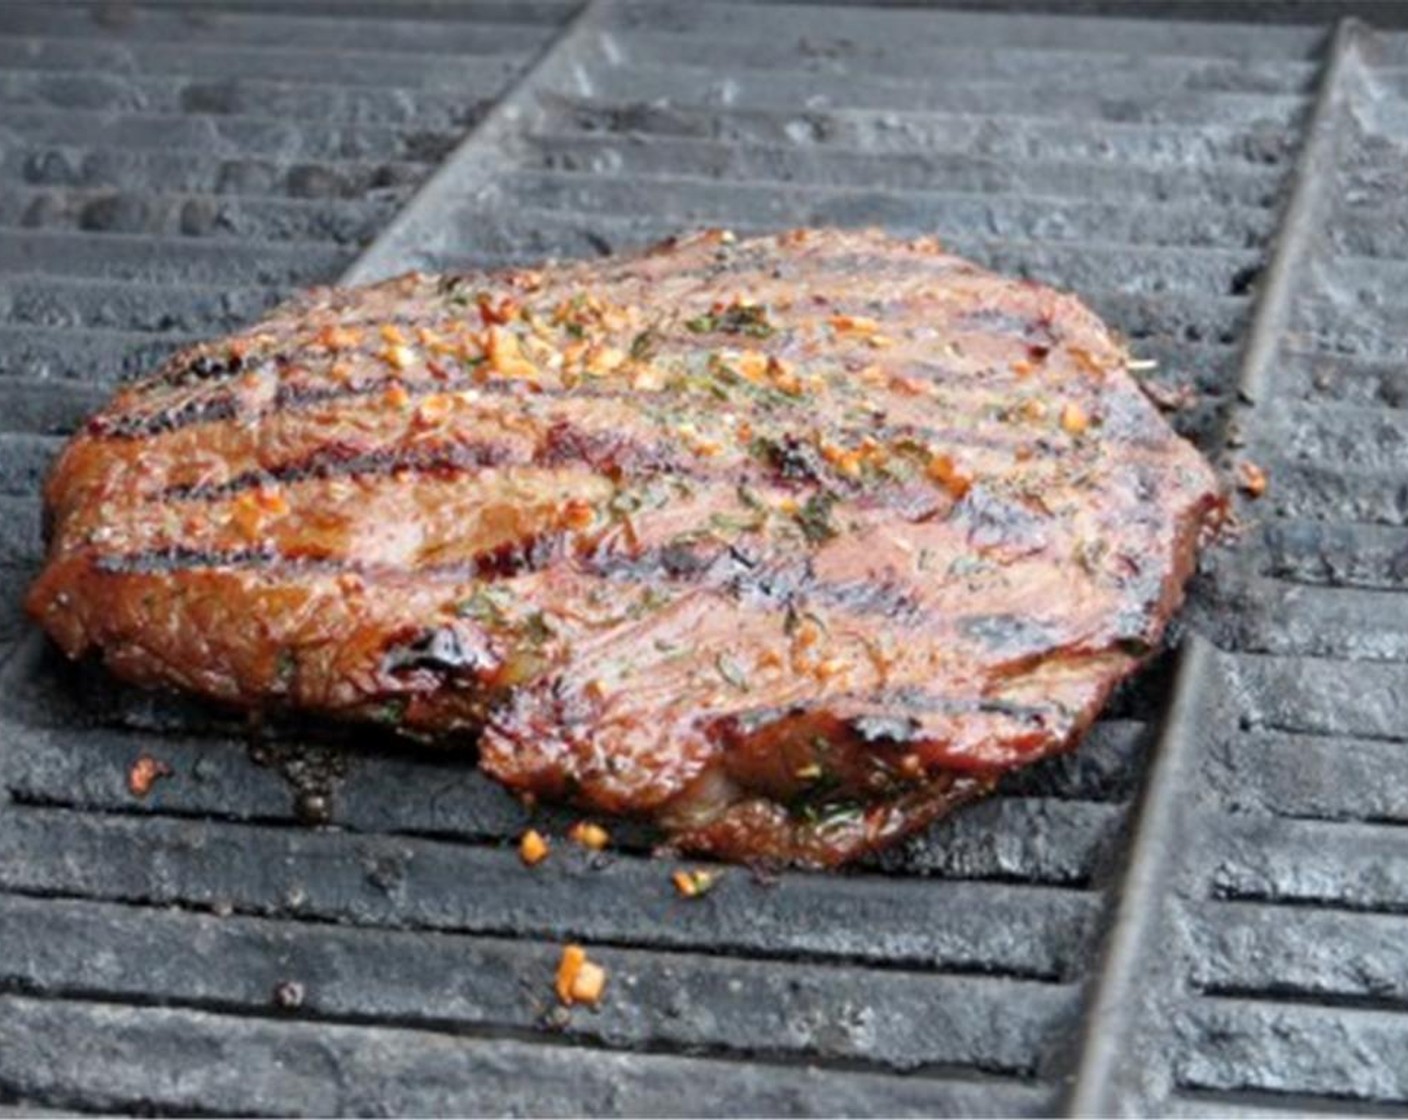 step 6 Preheat your grill, oil it and heat to med-high then place the flank steak on the grill and cook 4-6 minutes per side.